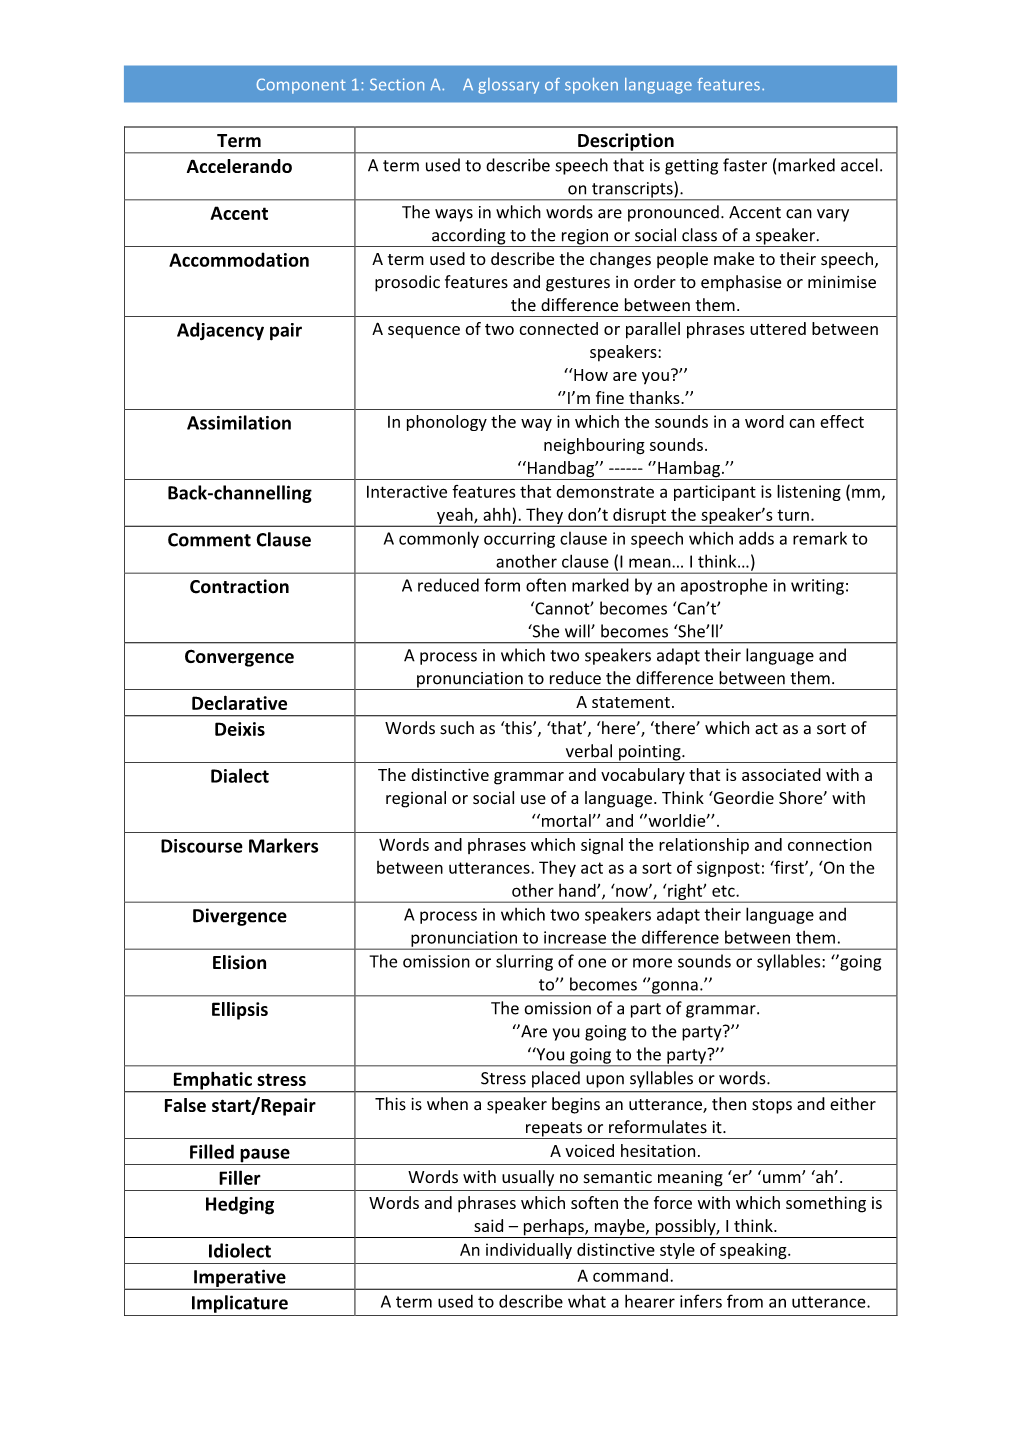 Component 1: Section A. a Glossary of Spoken Language Features